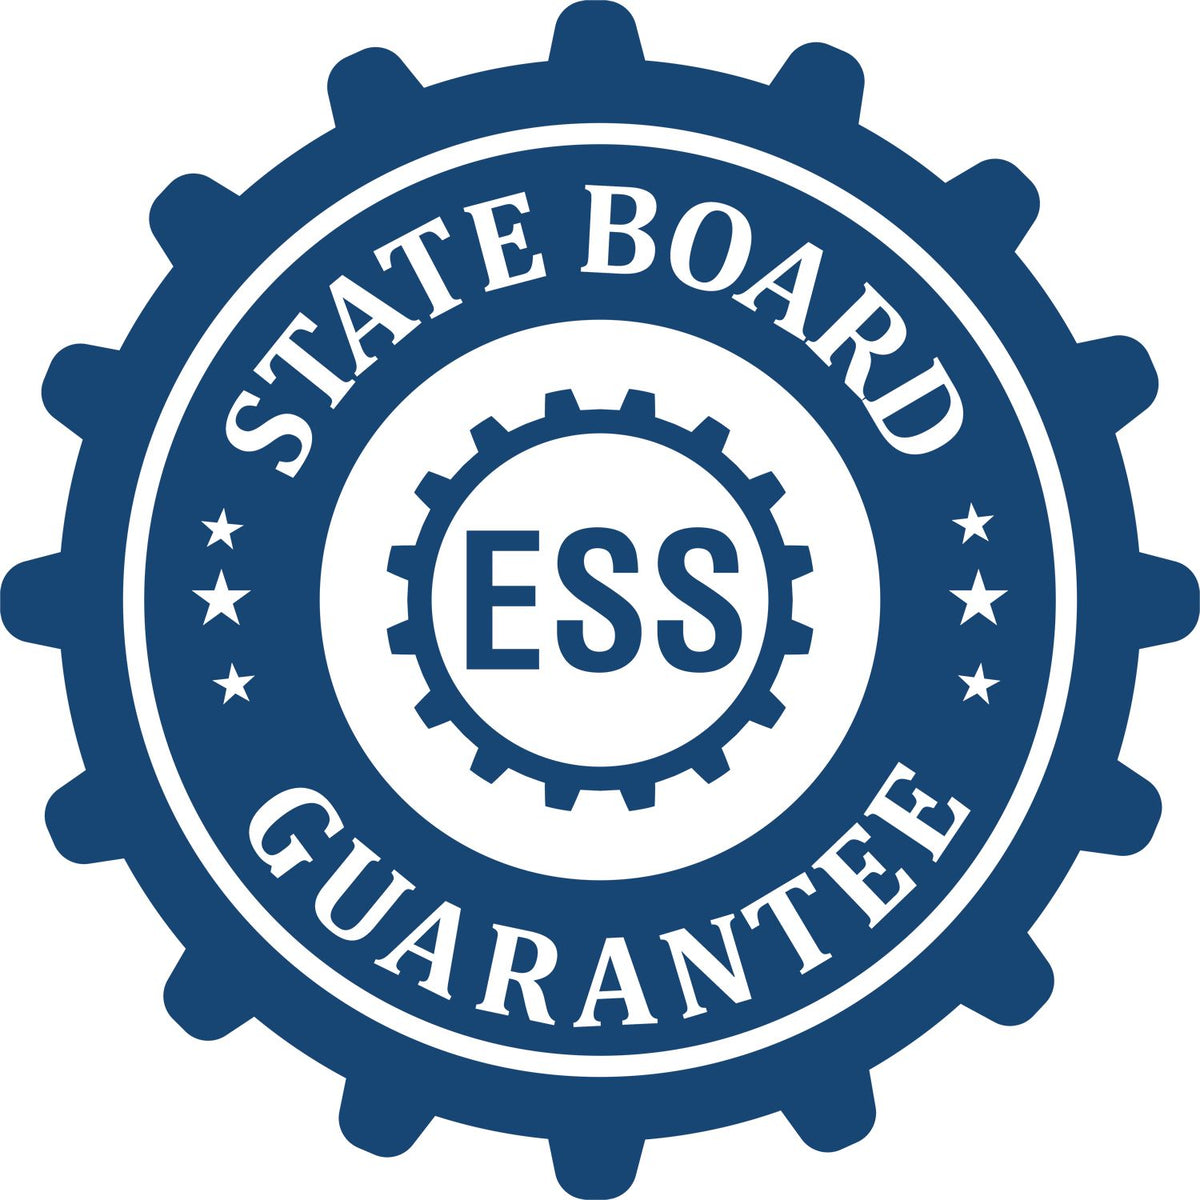 An emblem in a gear shape illustrating a state board guarantee for the Wooden Handle New Mexico State Seal Notary Public Stamp product.